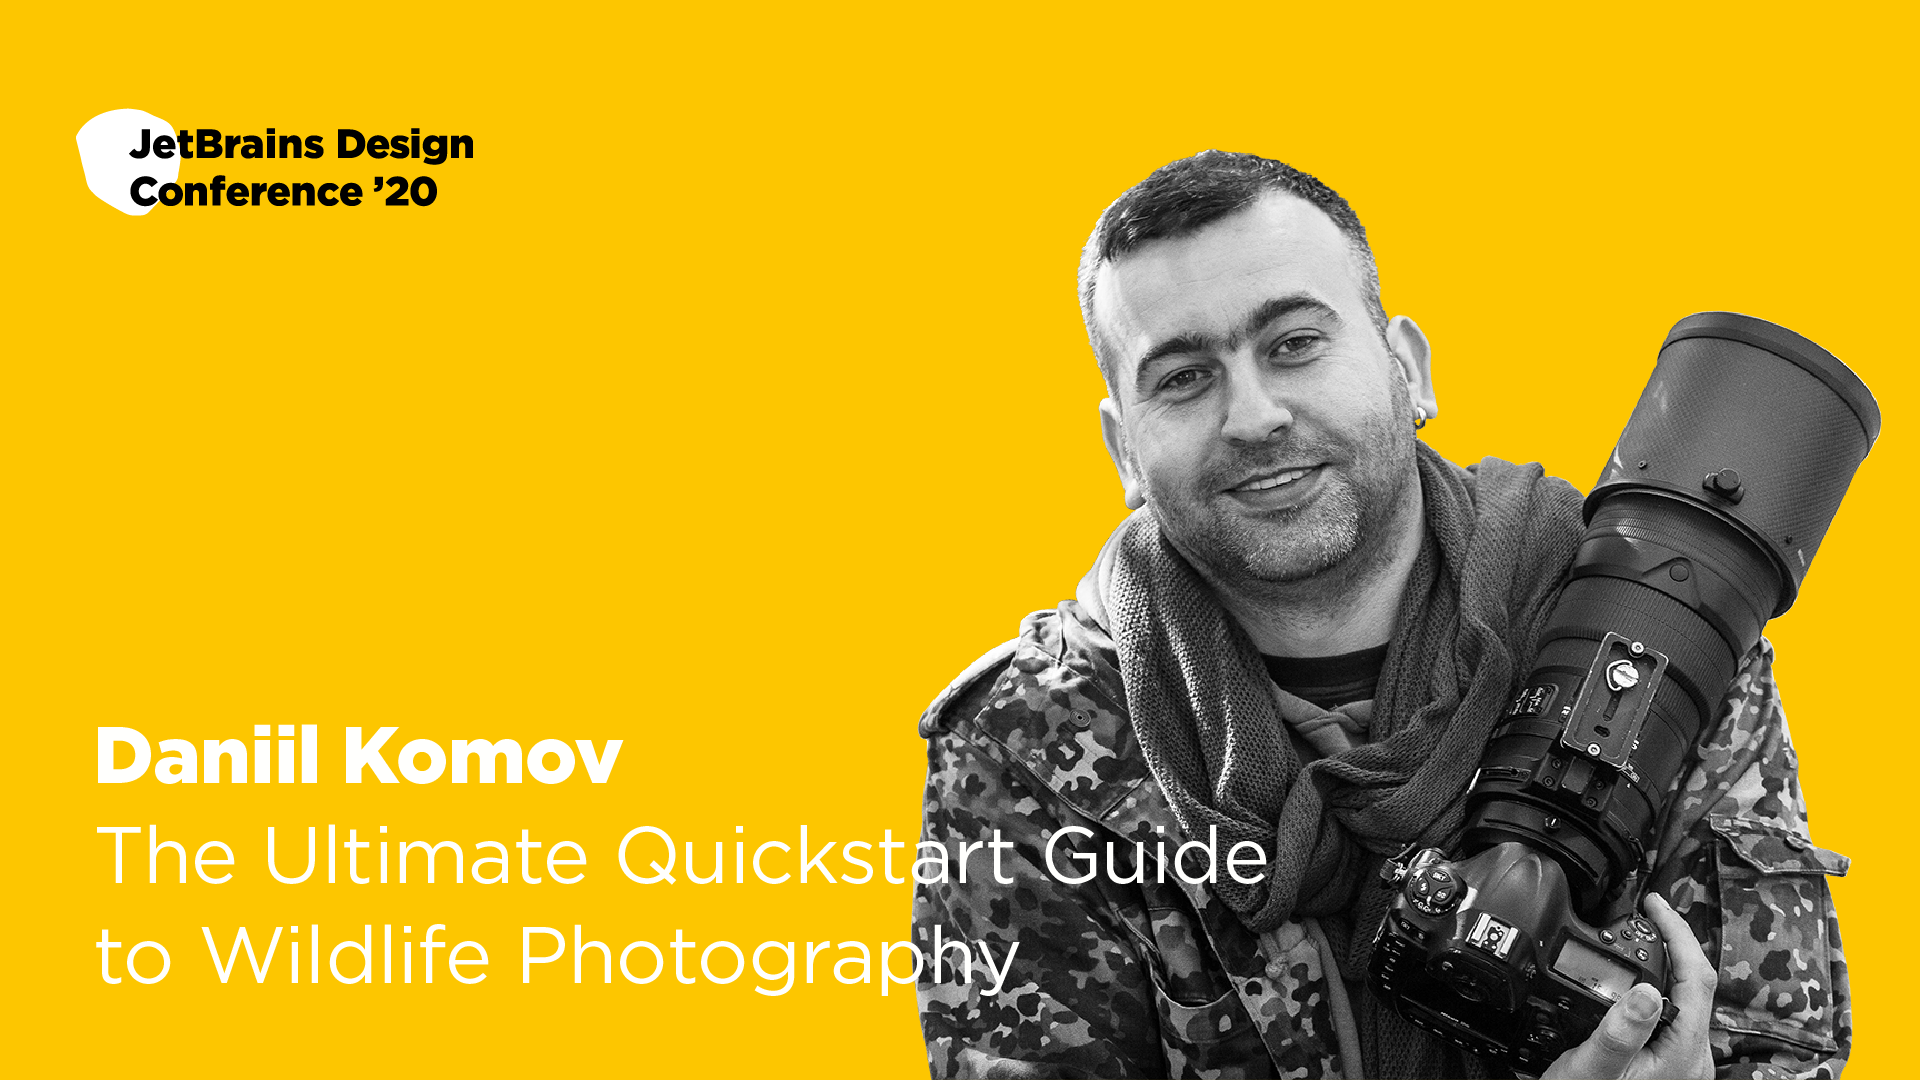 The Ultimate Quickstart Guide to Wildlife Photography